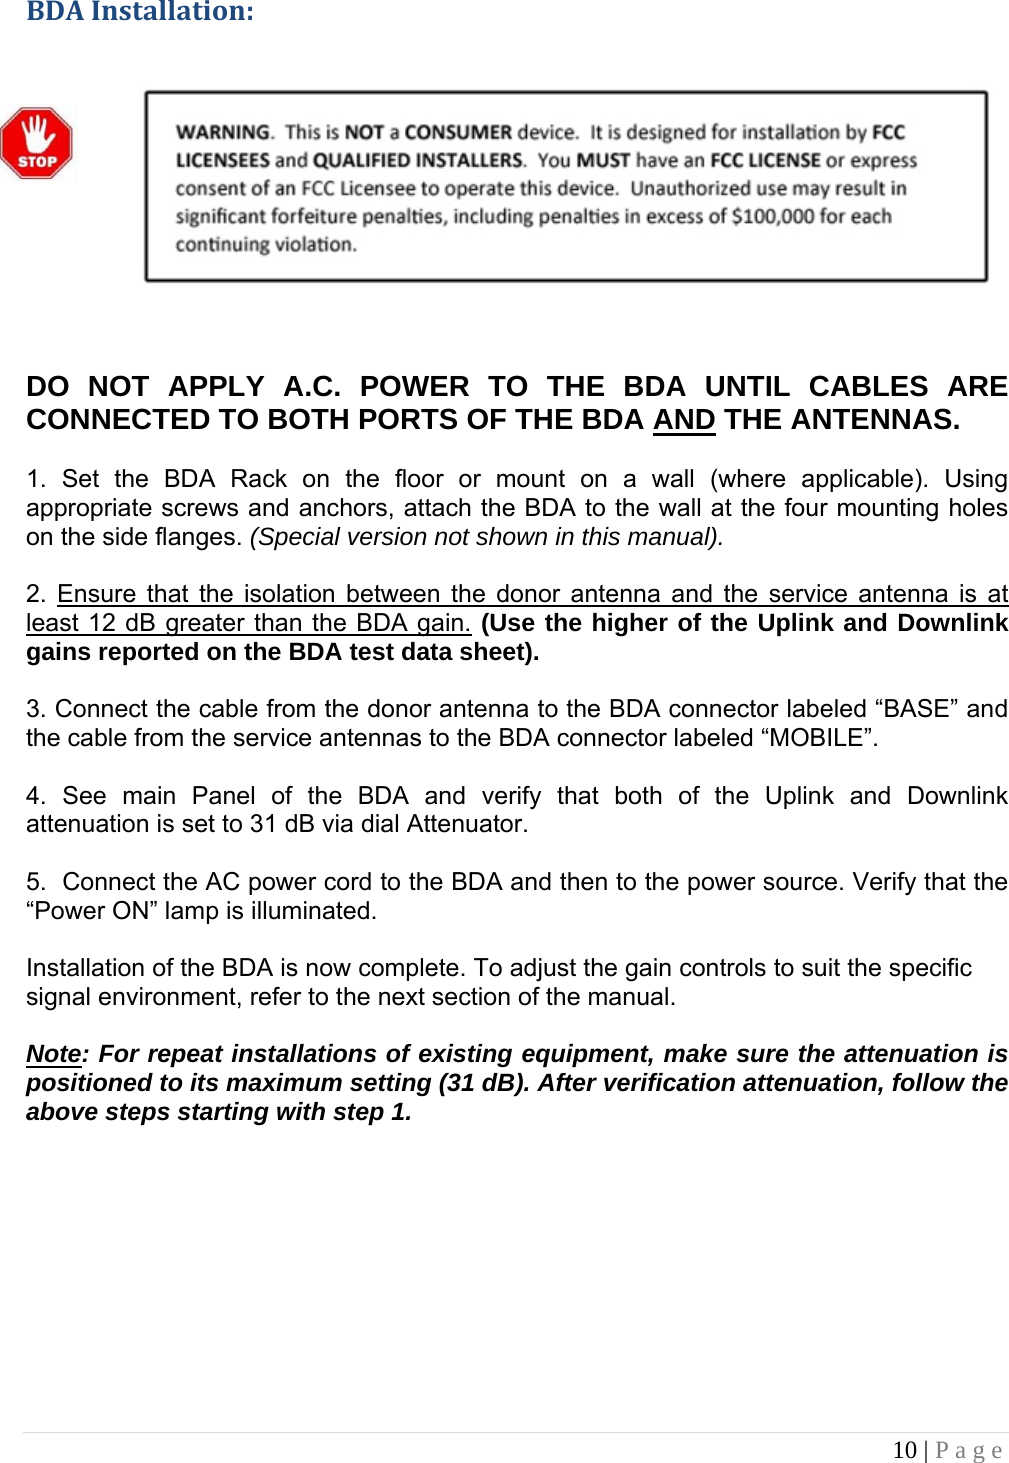 10 | Page  BDAInstallation:         DO NOT APPLY A.C. POWER TO THE BDA UNTIL CABLES ARE CONNECTED TO BOTH PORTS OF THE BDA AND THE ANTENNAS.   1. Set the BDA Rack on the floor or mount on a wall (where applicable). Using appropriate screws and anchors, attach the BDA to the wall at the four mounting holes on the side flanges. (Special version not shown in this manual).  2. Ensure that the isolation between the donor antenna and the service antenna is at least 12 dB greater than the BDA gain. (Use the higher of the Uplink and Downlink gains reported on the BDA test data sheet).  3. Connect the cable from the donor antenna to the BDA connector labeled “BASE” and the cable from the service antennas to the BDA connector labeled “MOBILE”.  4. See main Panel of the BDA and verify that both of the Uplink and Downlink attenuation is set to 31 dB via dial Attenuator.    5.  Connect the AC power cord to the BDA and then to the power source. Verify that the “Power ON” lamp is illuminated.   Installation of the BDA is now complete. To adjust the gain controls to suit the specific signal environment, refer to the next section of the manual.  Note: For repeat installations of existing equipment, make sure the attenuation is positioned to its maximum setting (31 dB). After verification attenuation, follow the above steps starting with step 1.        